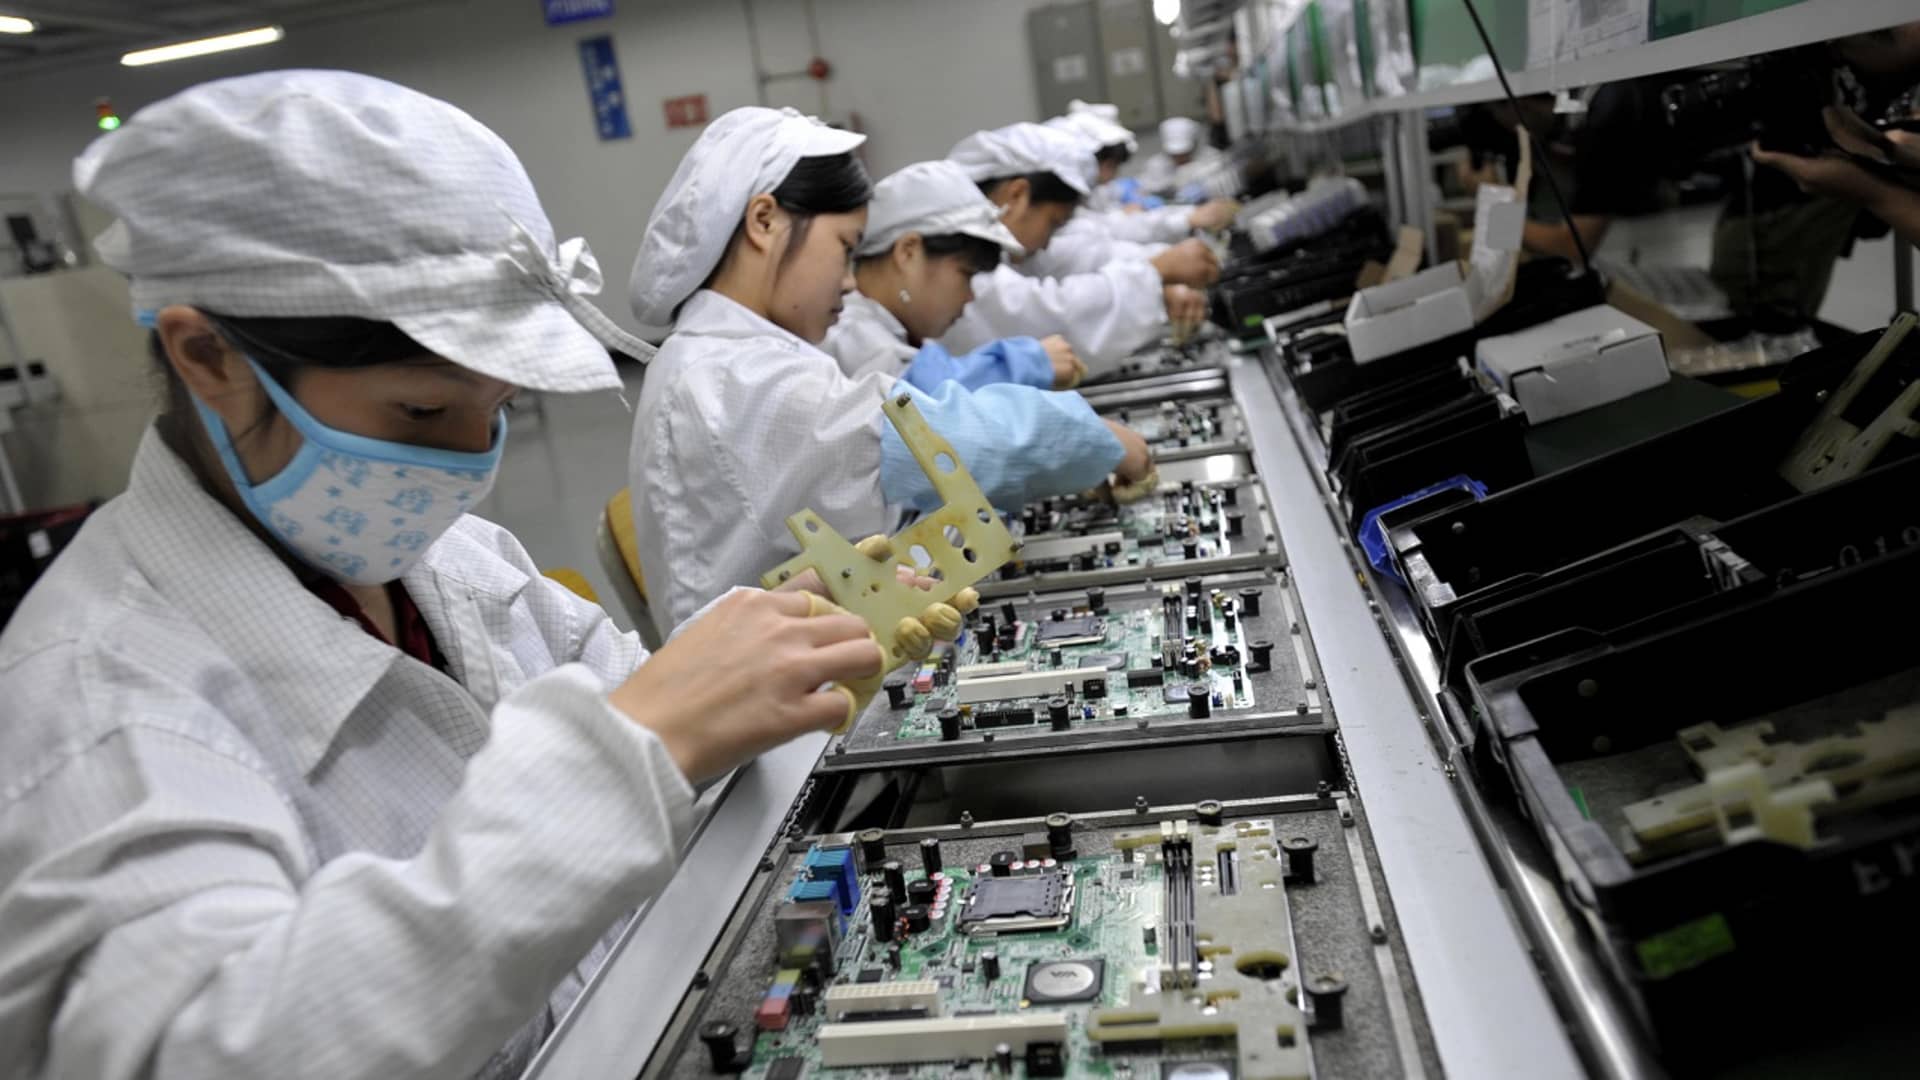 Chinese workers assemble electronic components at the Taiwanese technology giant Foxconn's factory in Shenzhen, China.